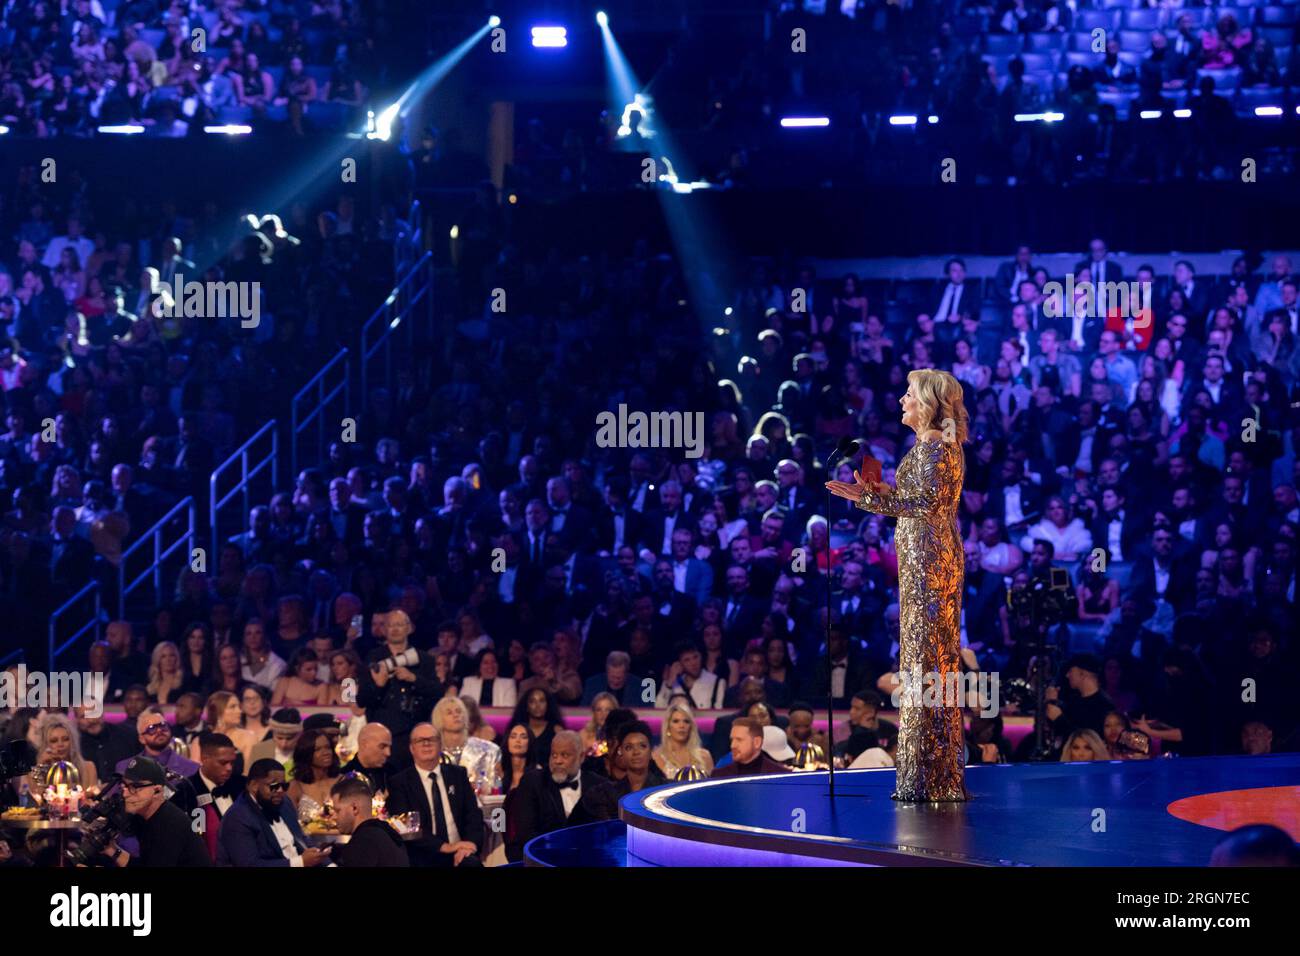 Reportage: First Lady Jill Biden presents Song of the Year at the Grammy Awards, Sunday, February 5, 2023, at the Crypto.com Arena in Los Angeles. Stock Photo